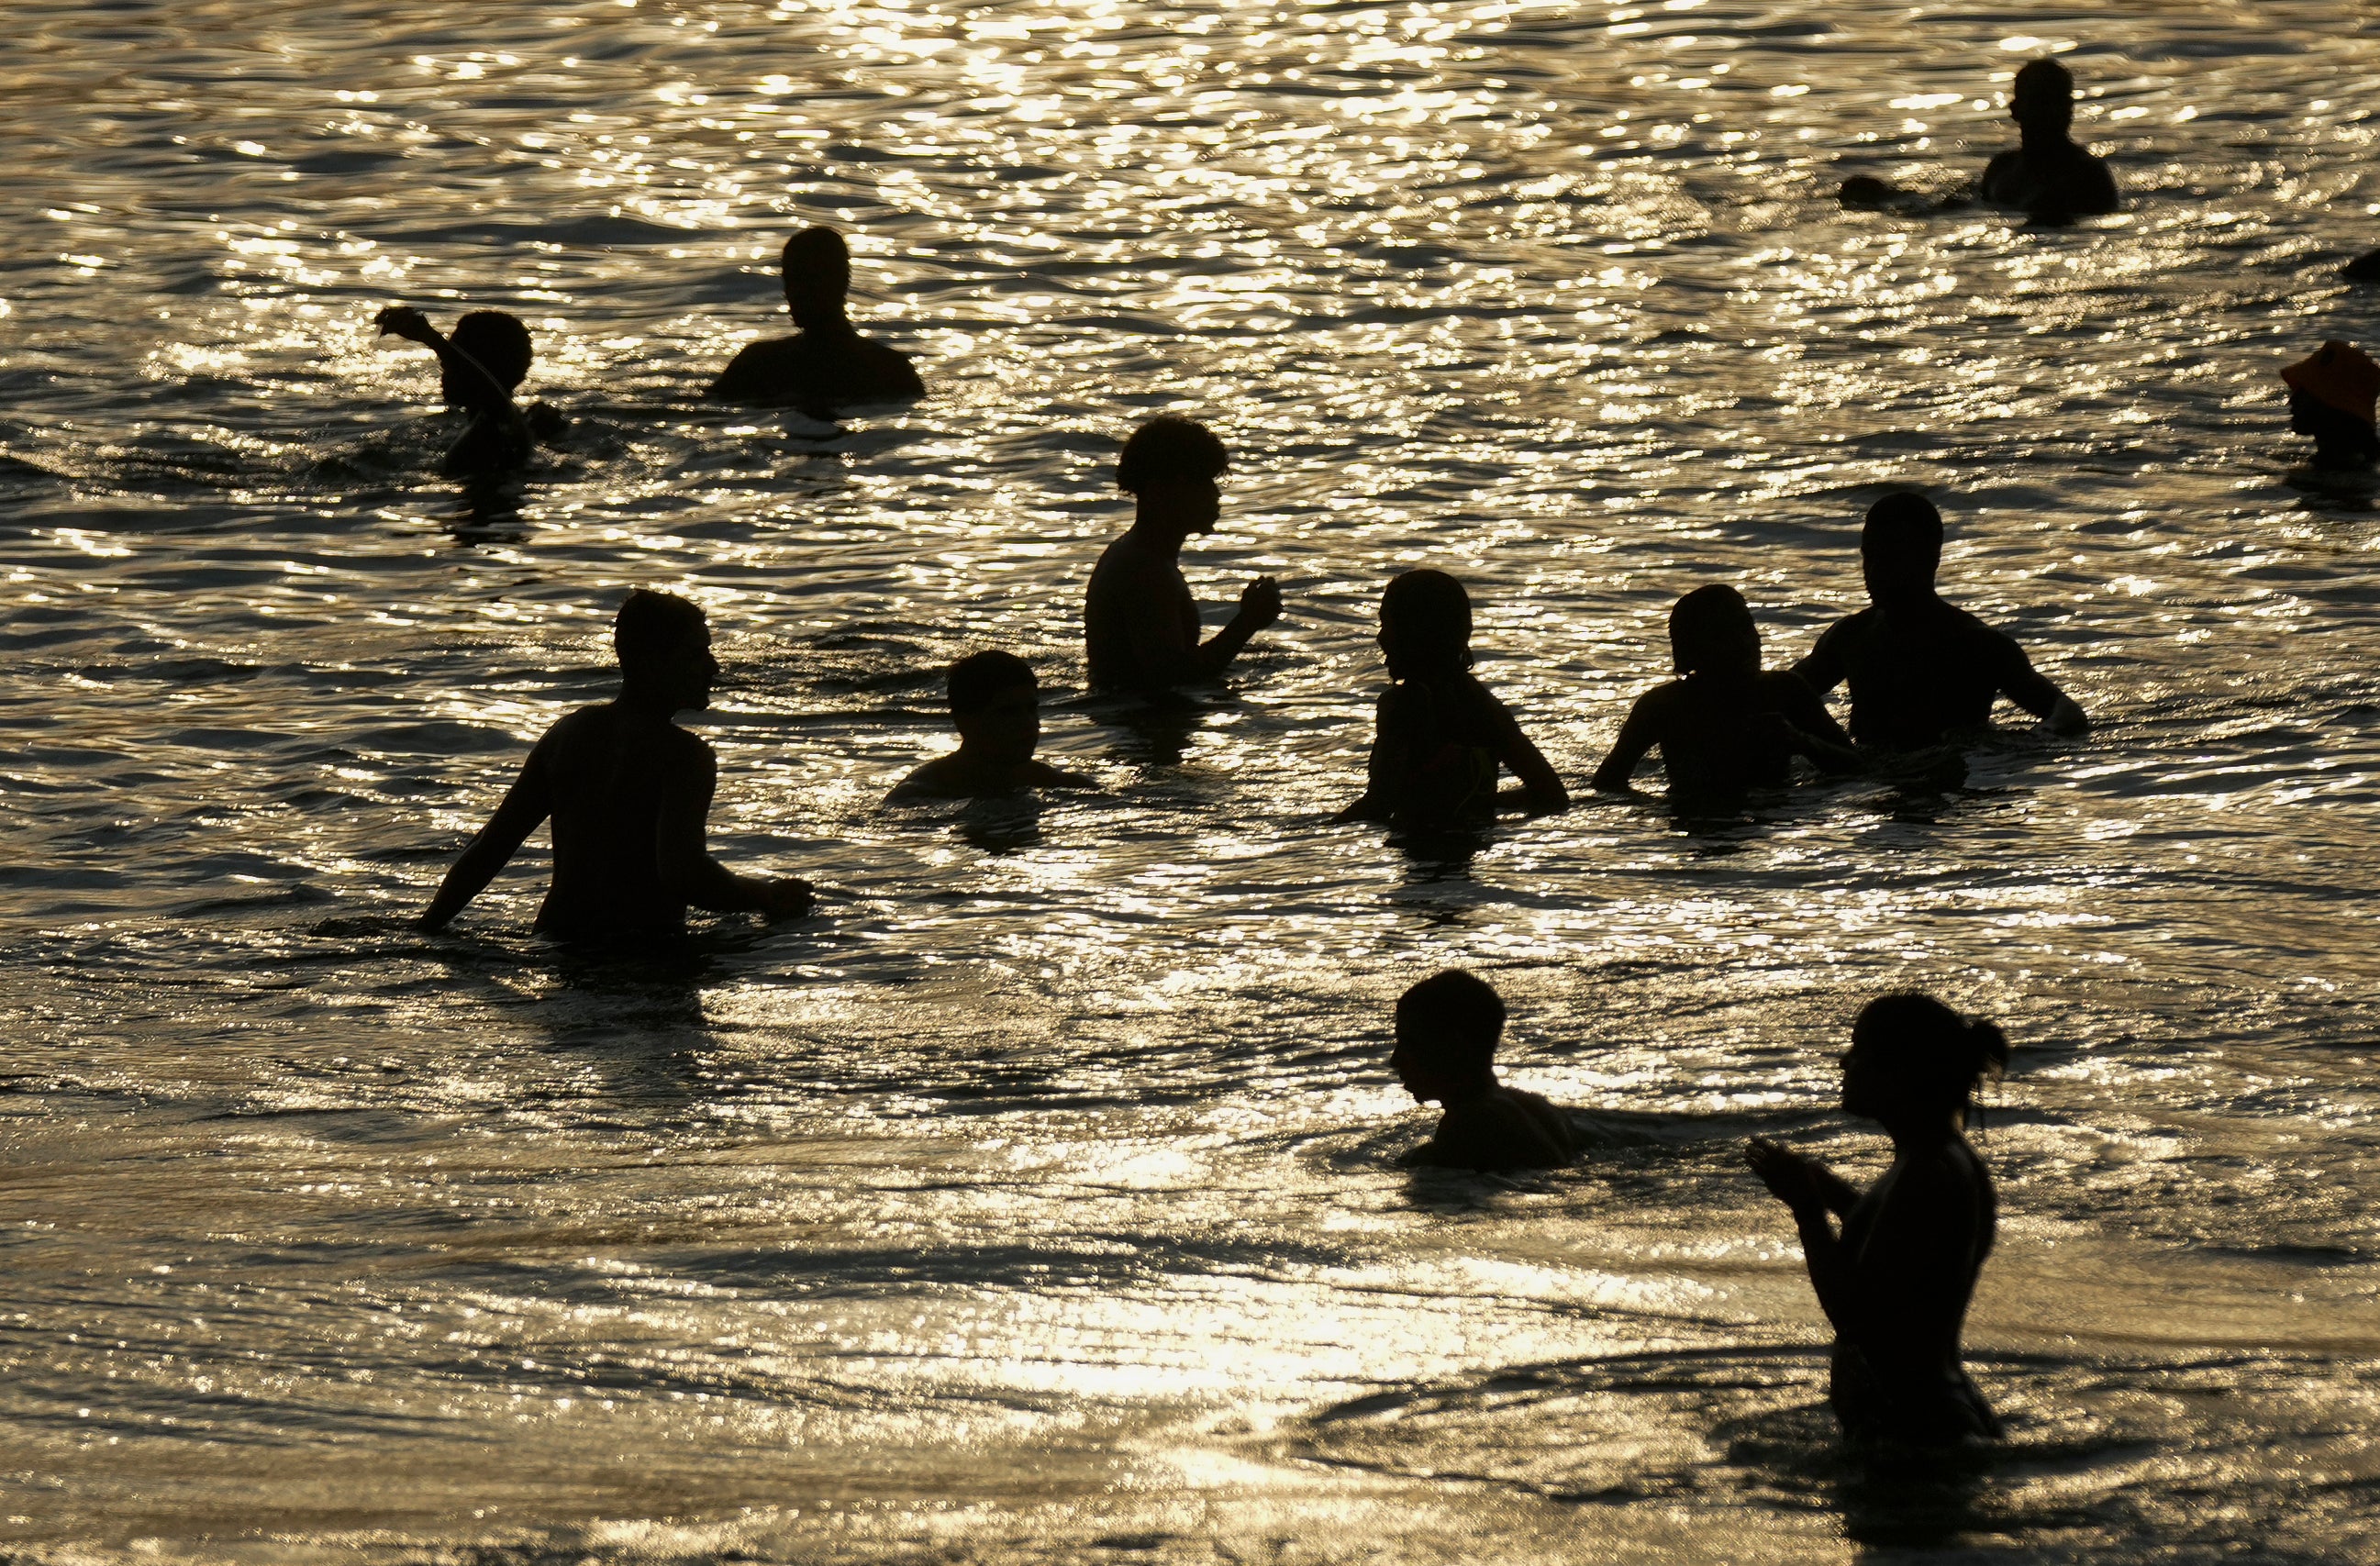 People cool off in the shallow waters of Arpoador beach amid a heat wave, in Rio de Janeiro, Brazil